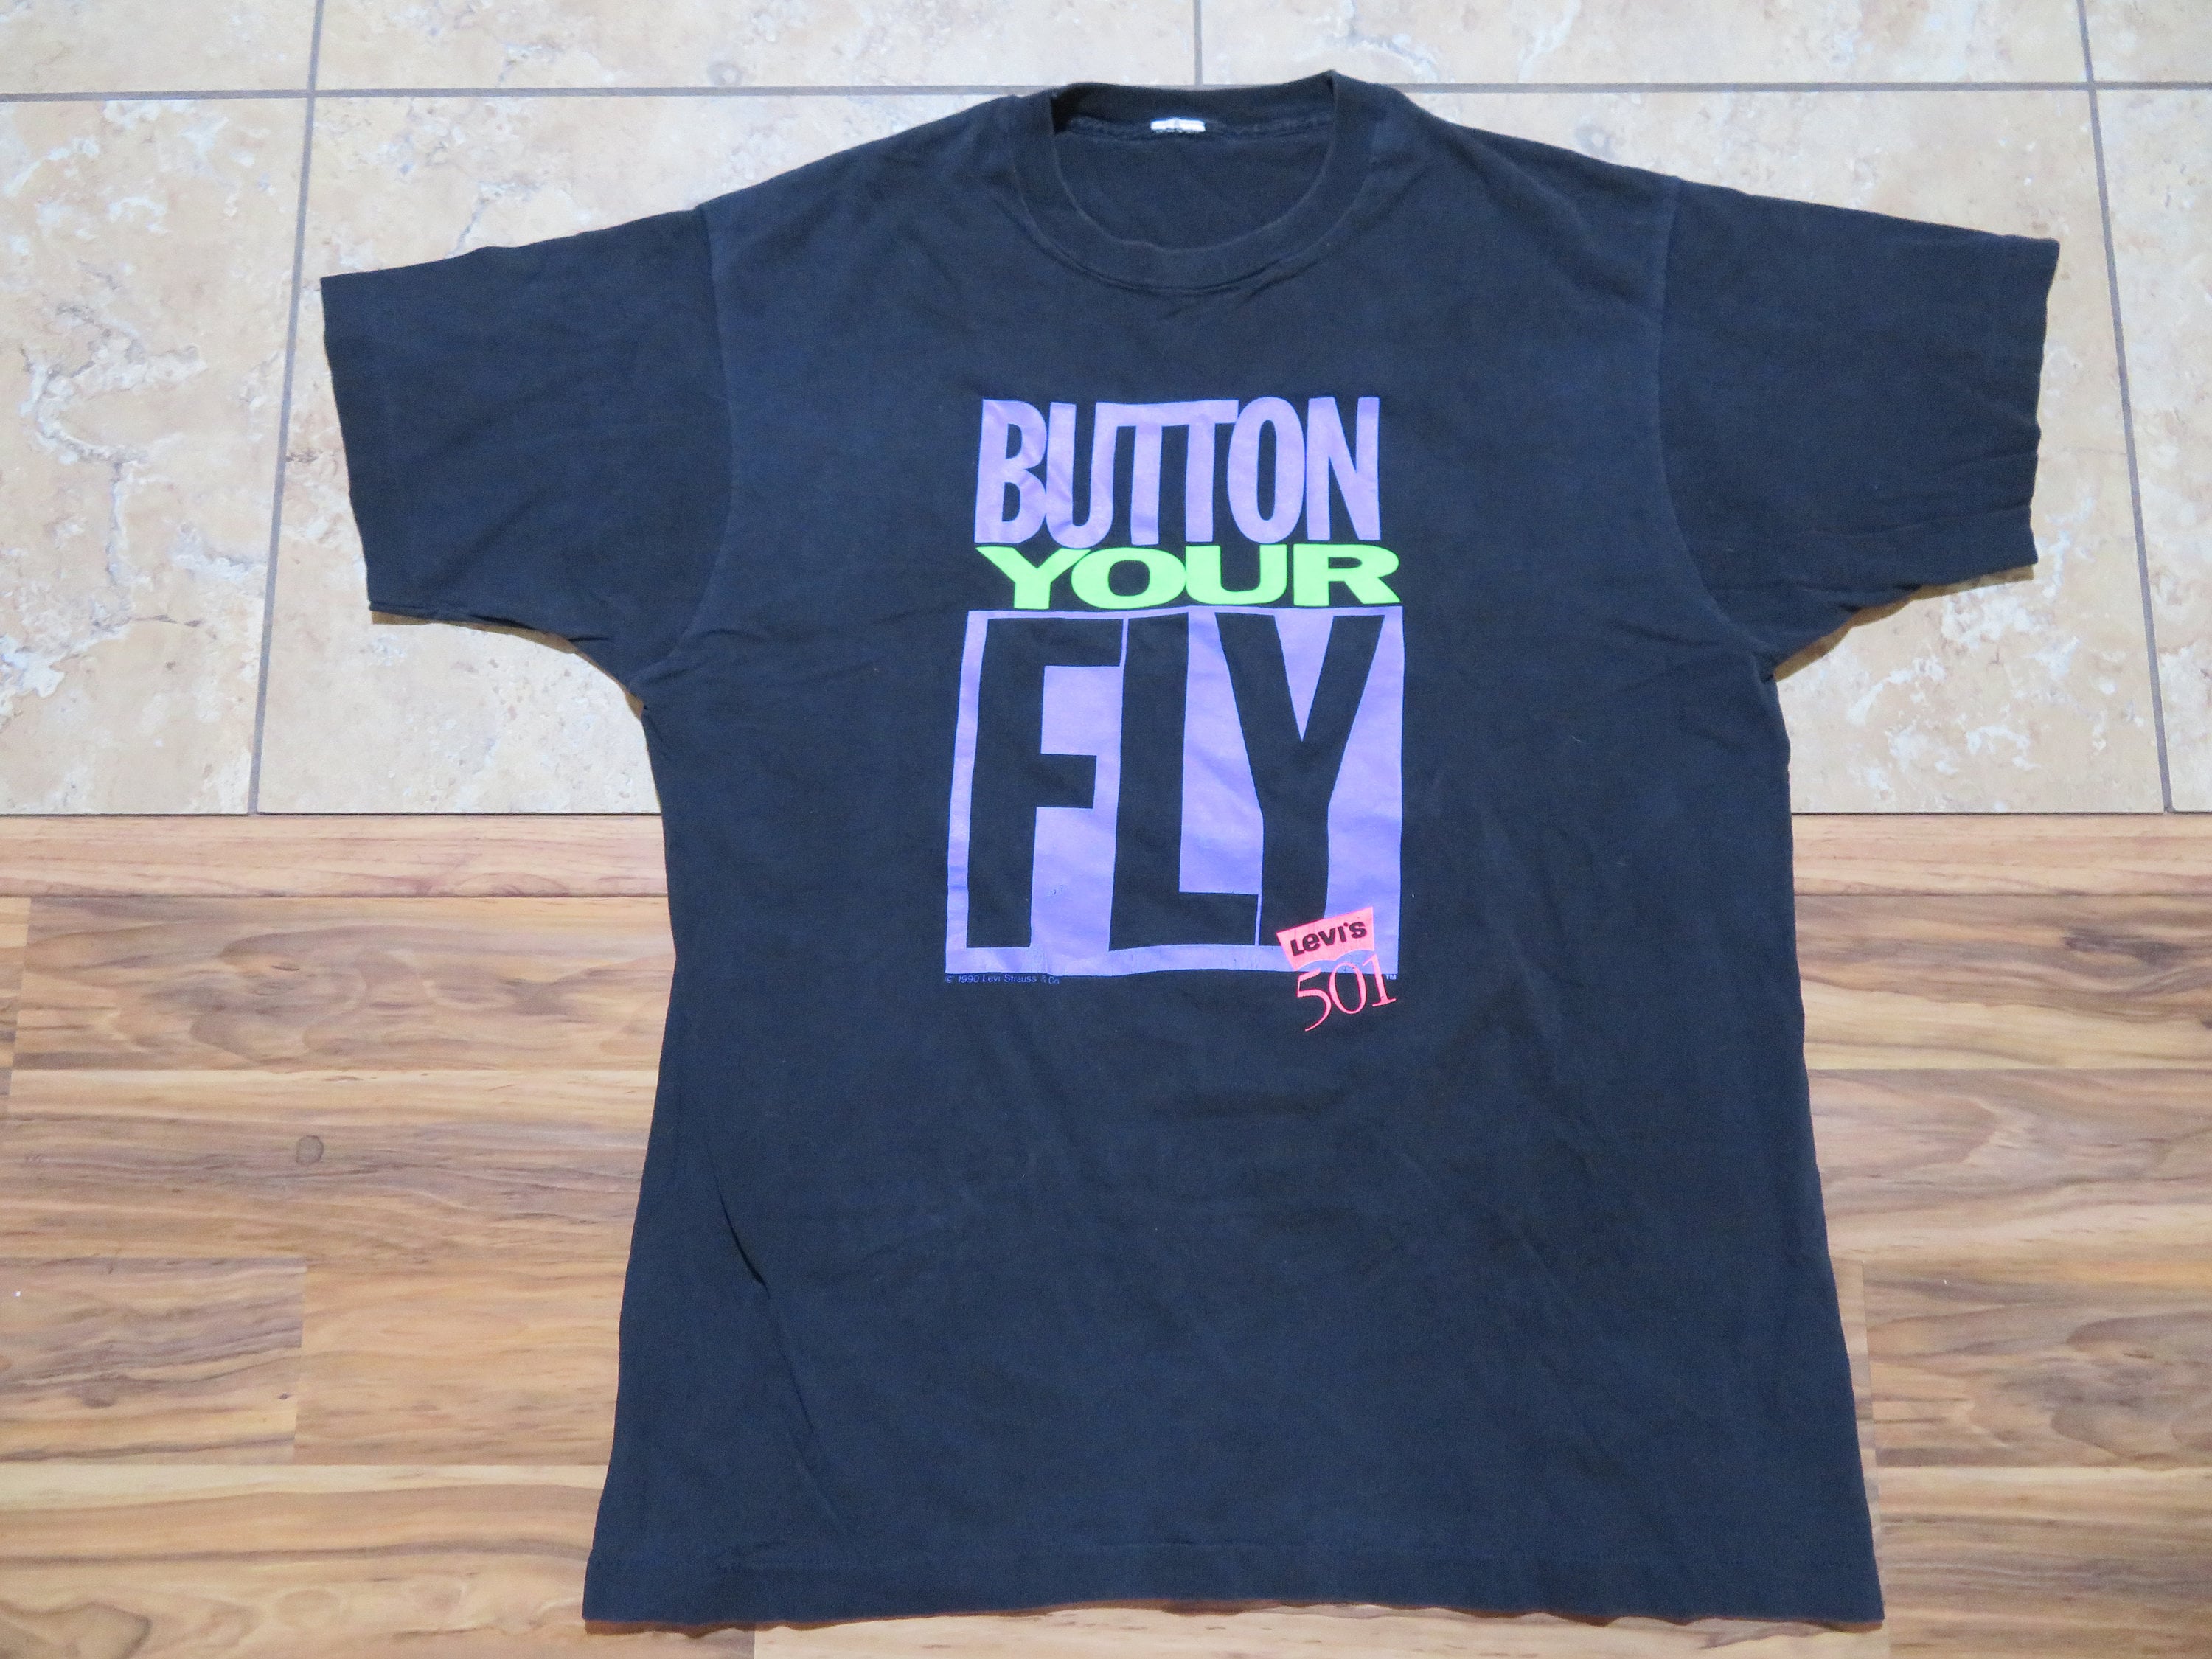 Vintage LEVIS 501 Button Your Fly Advertising T-shirt Black - Etsy